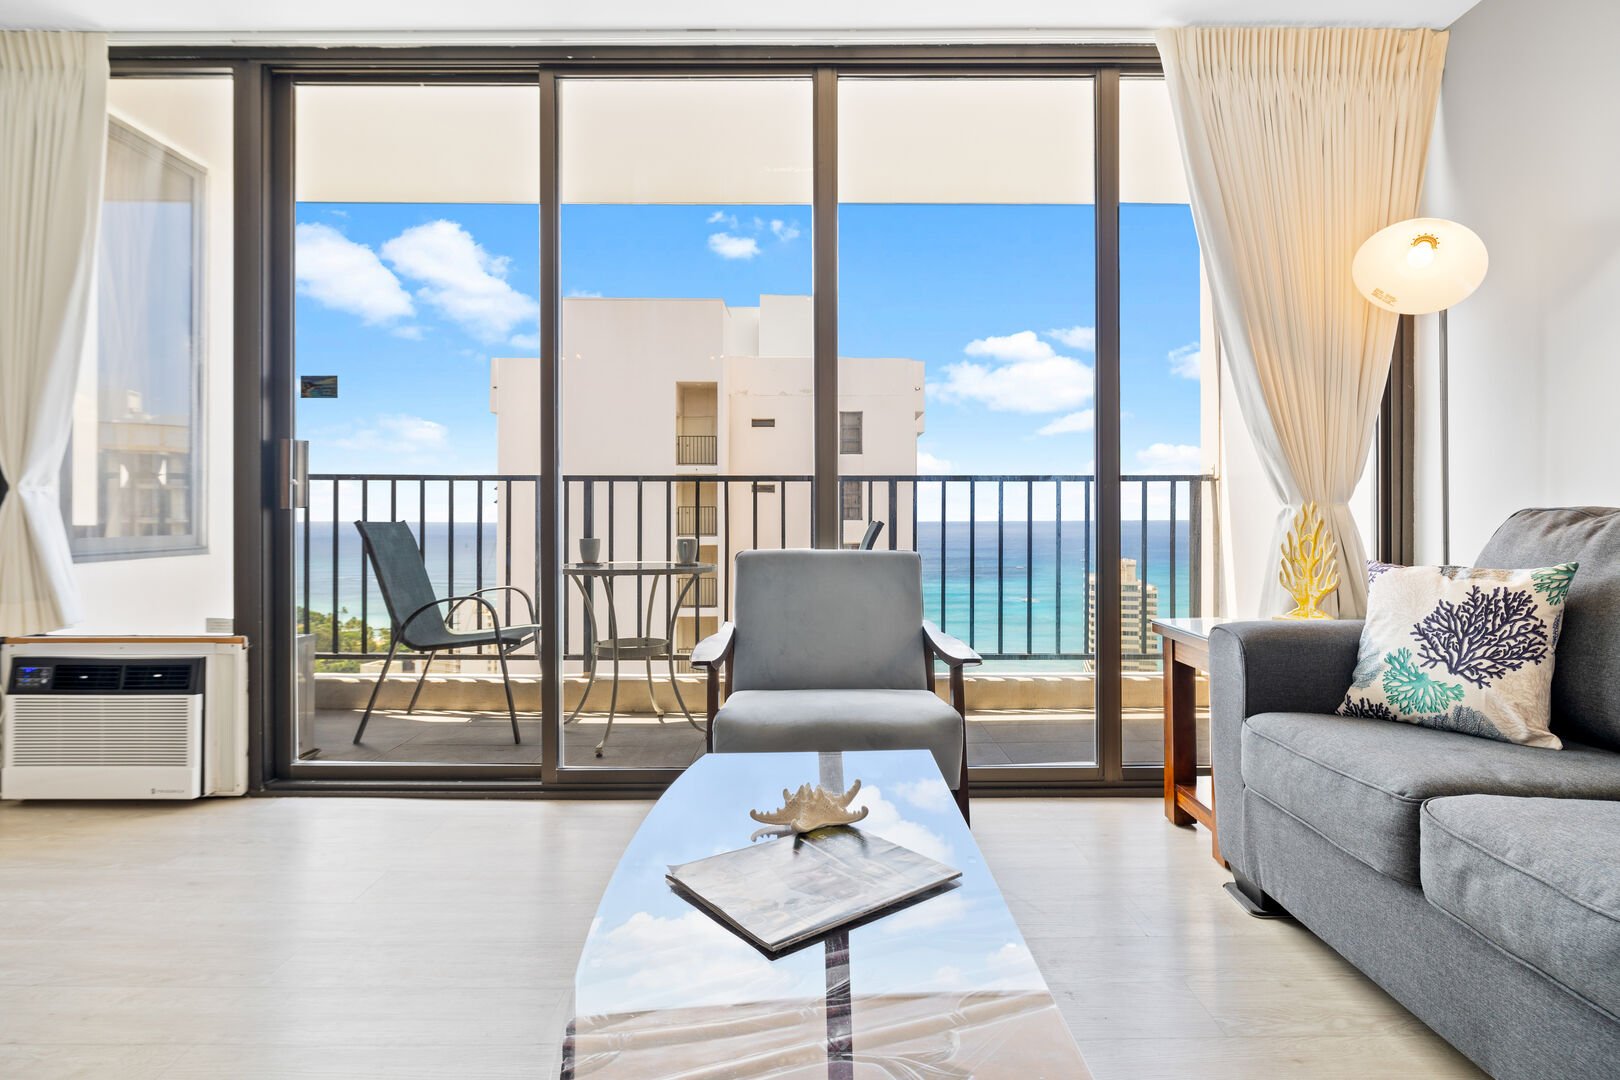 Look at the beautiful ocean views from your living room!